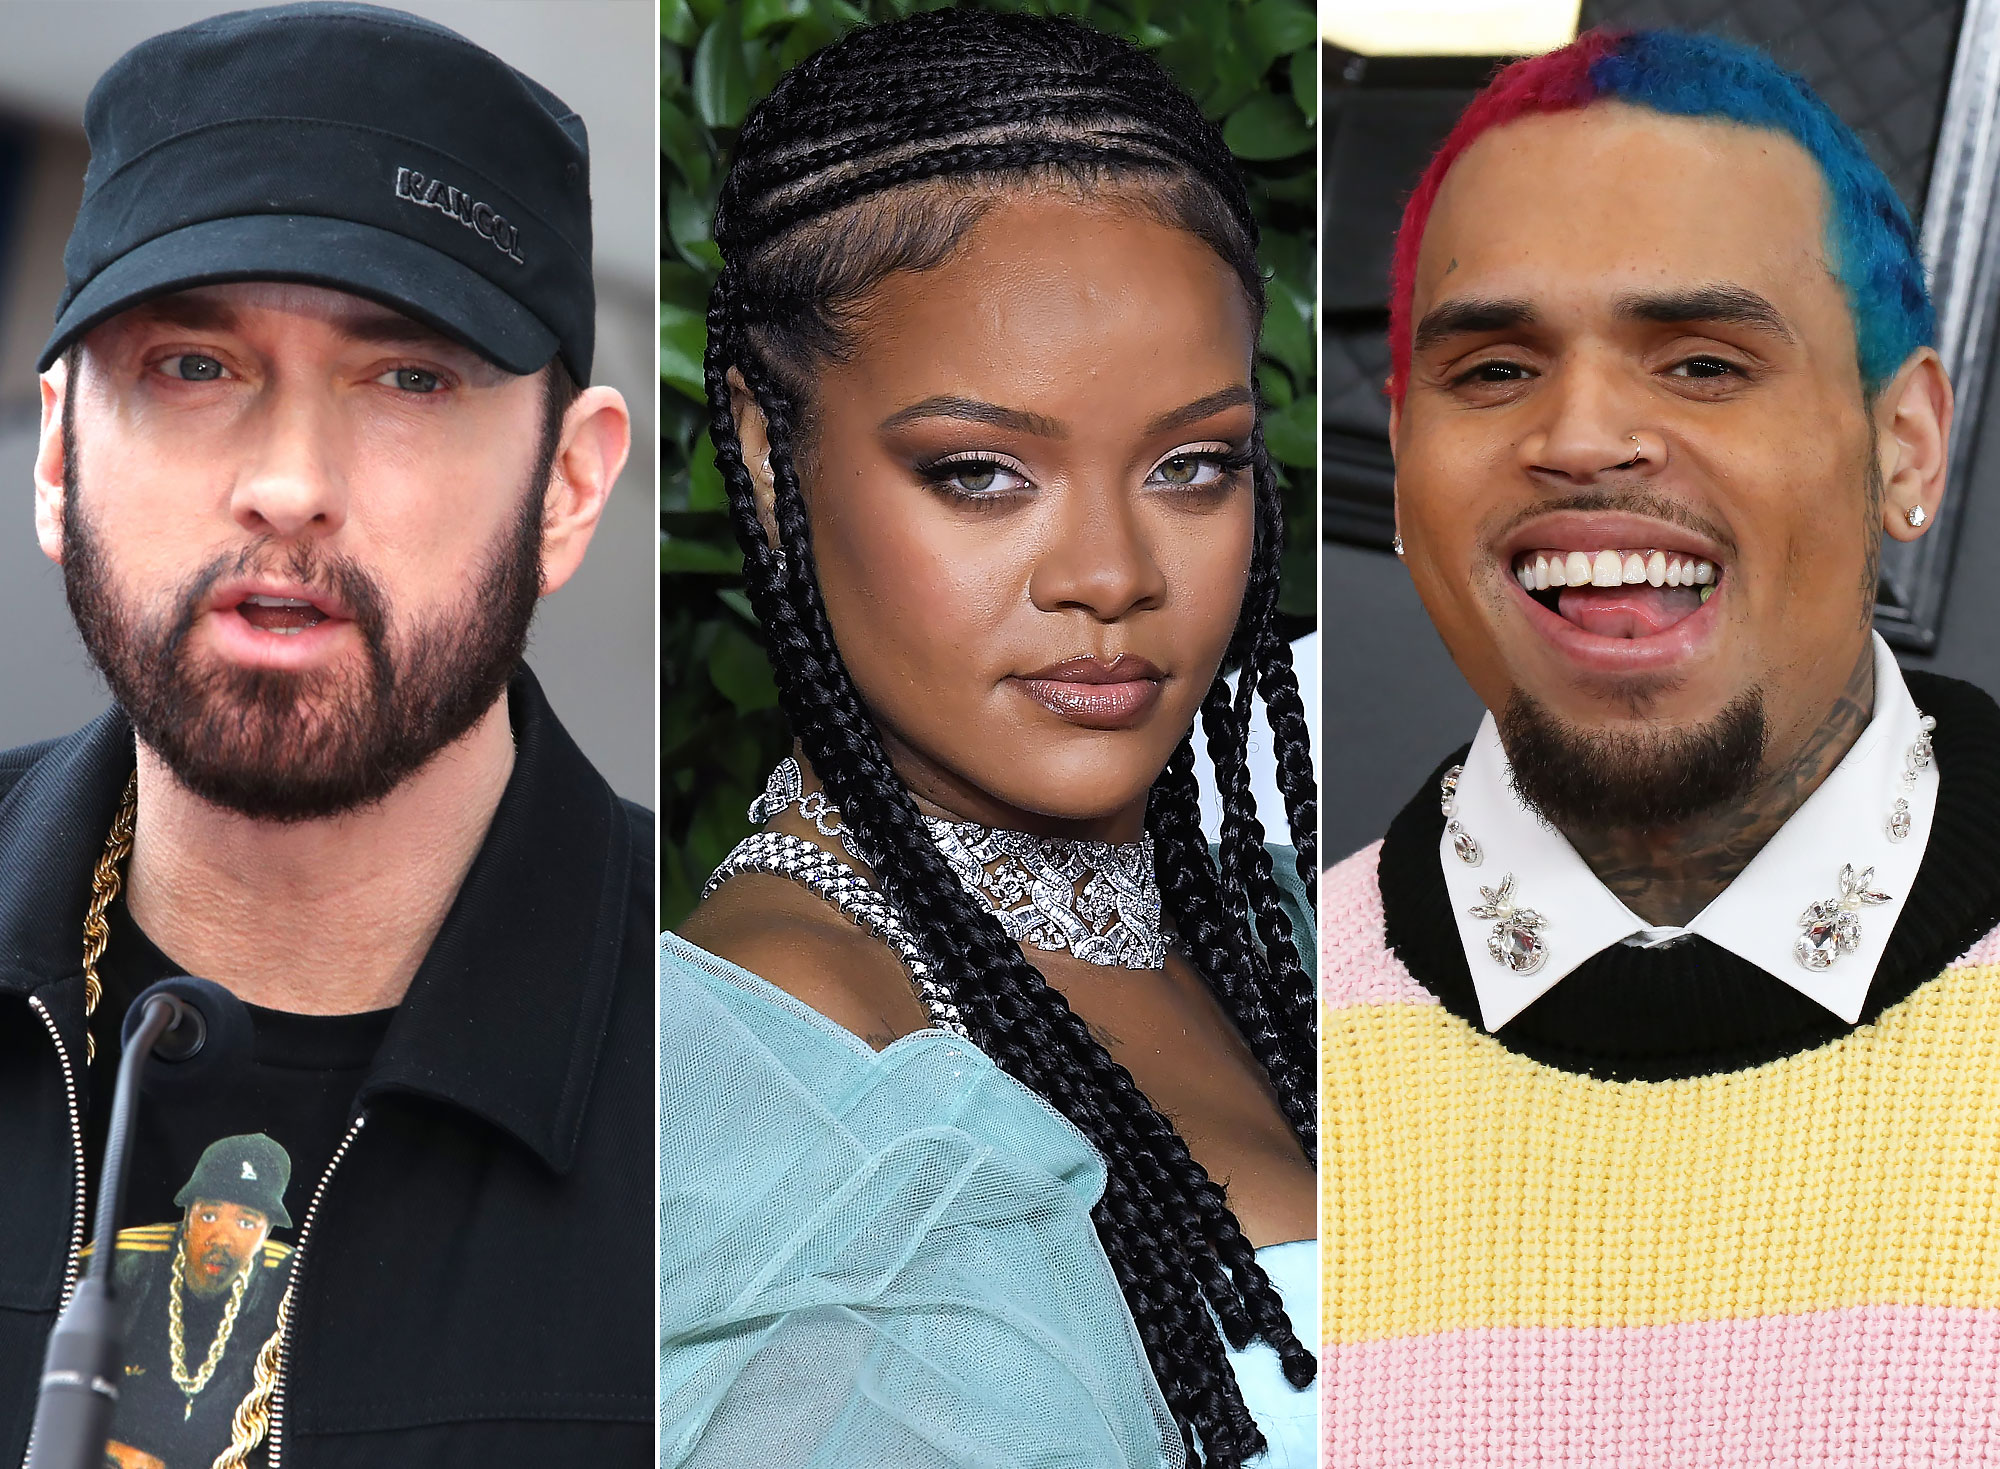 Eminem Has a Beard and Brown Hair Now and the Internet Can't Handle It |  whas11.com